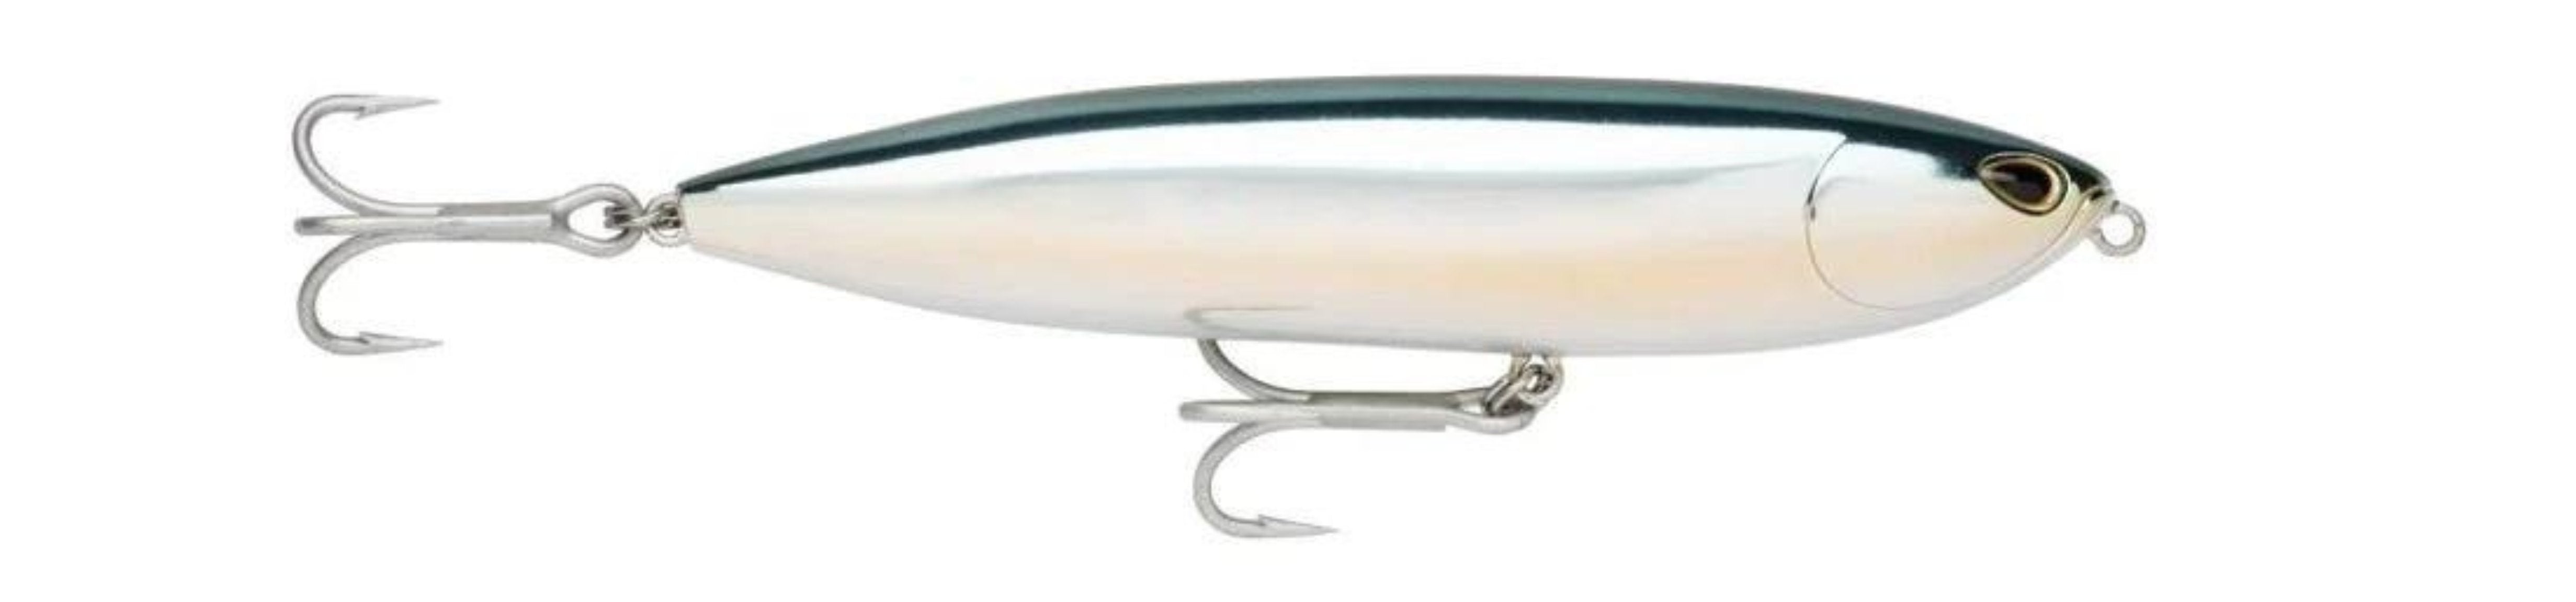 Lipless Lures